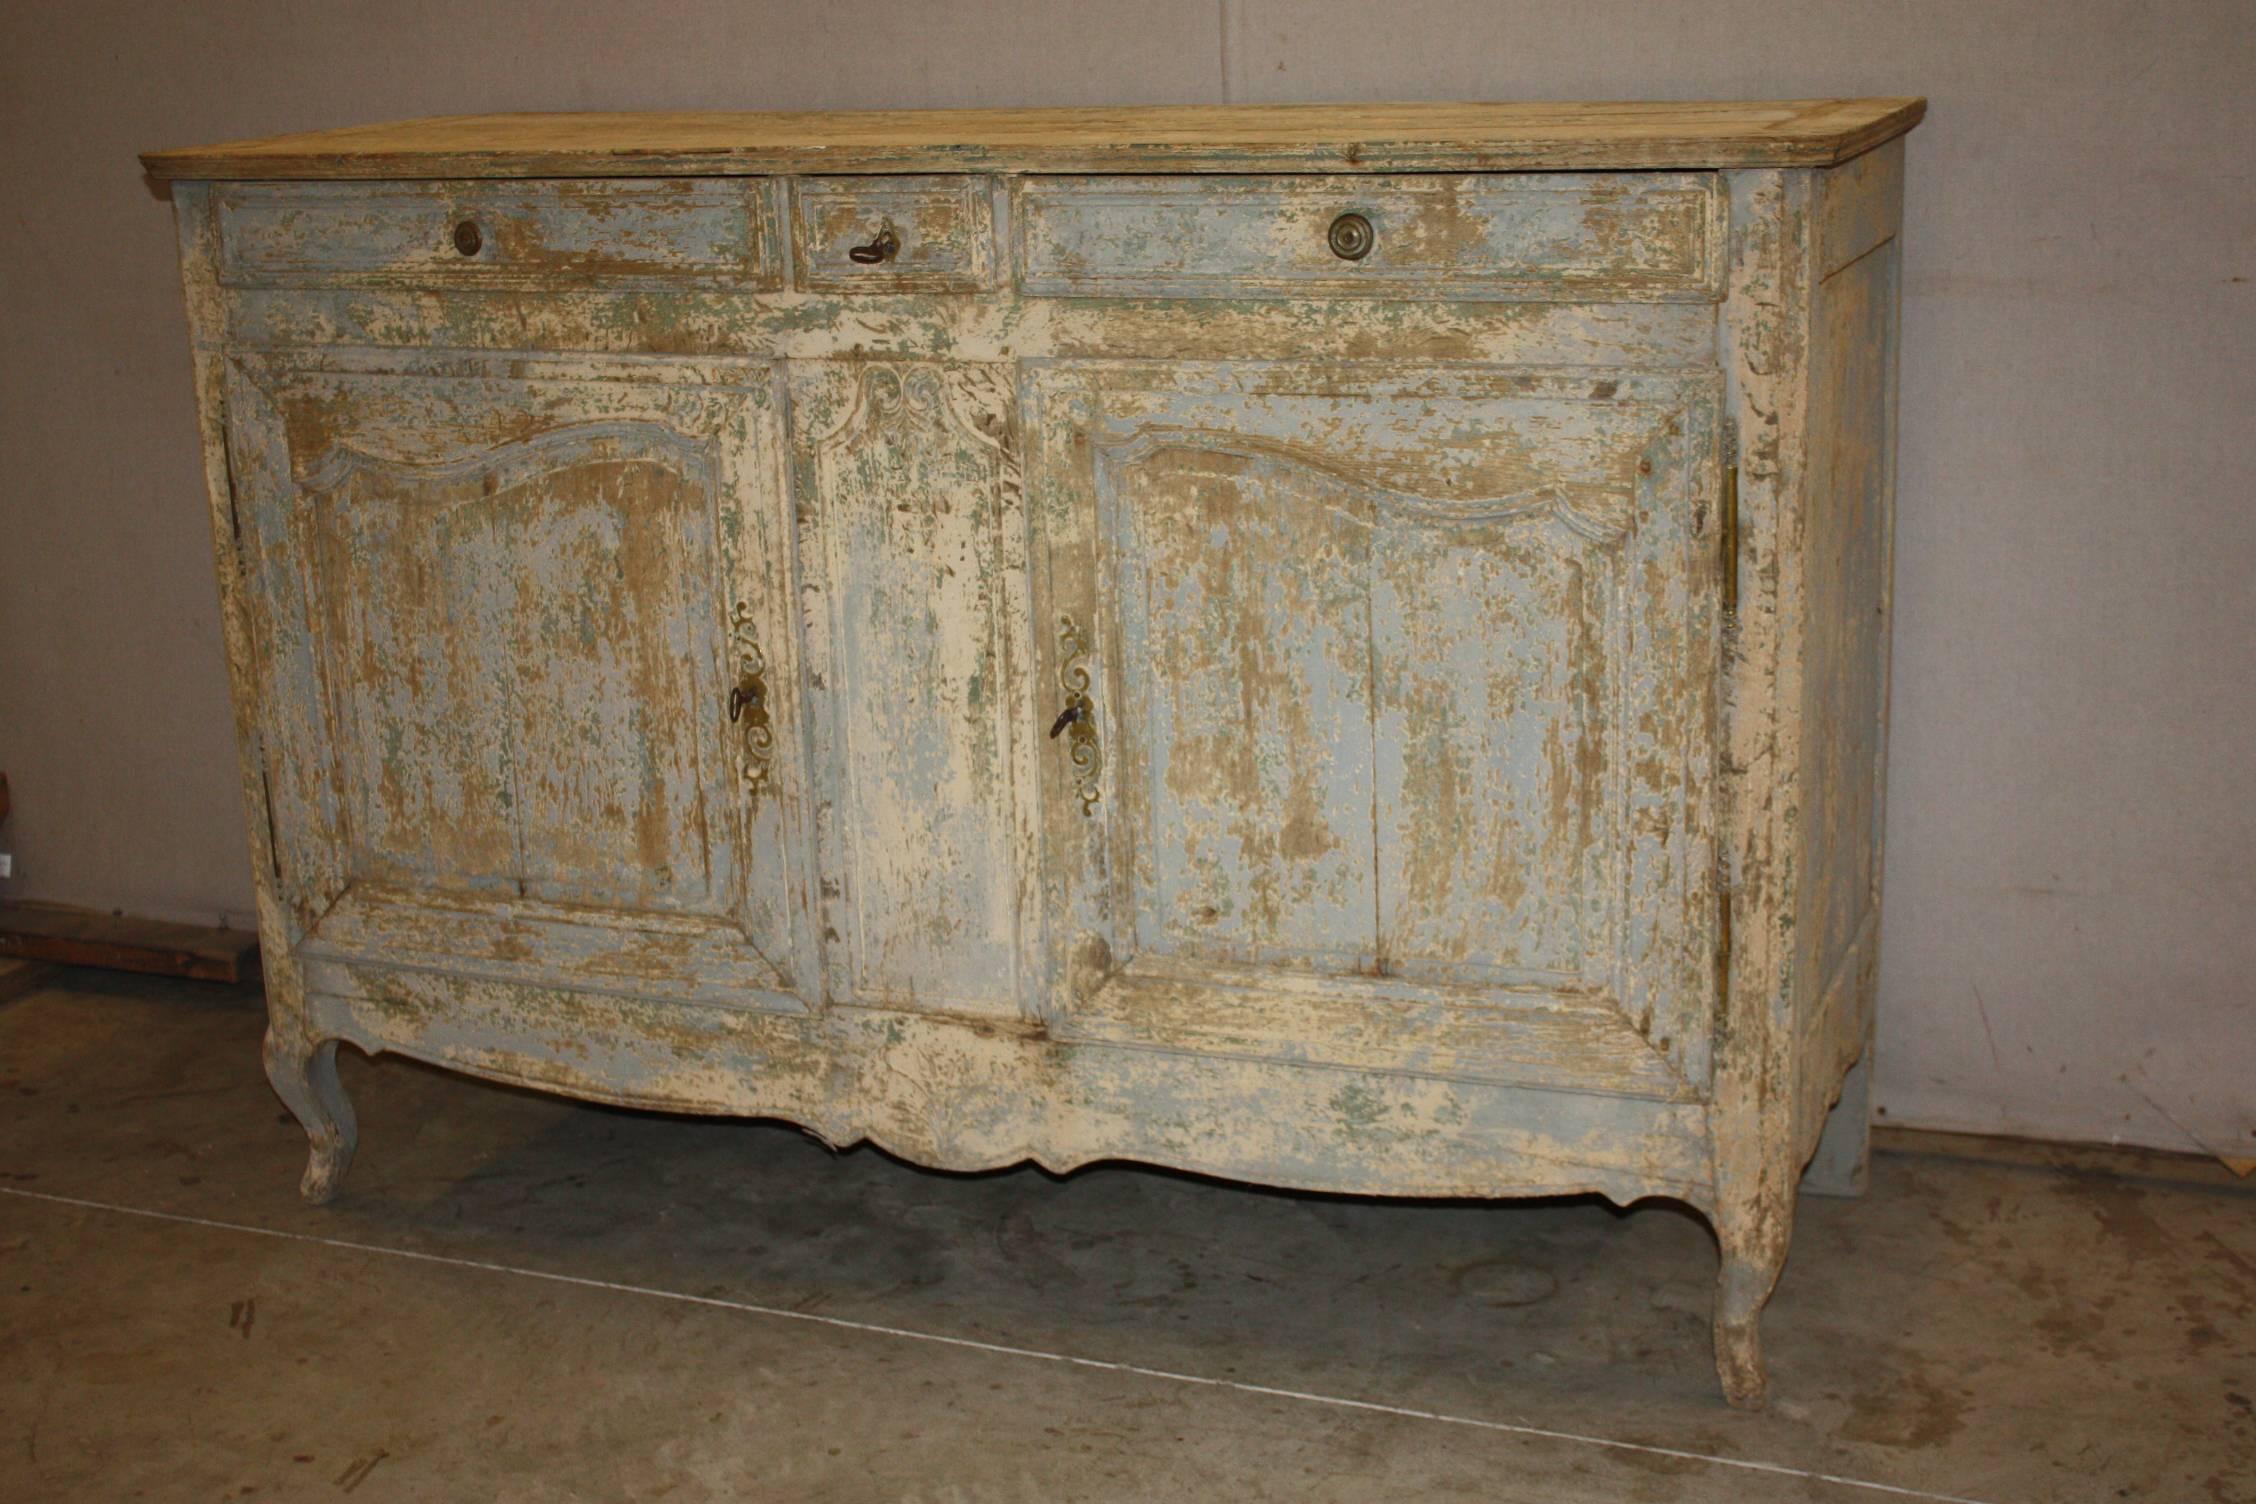 Beautifully carved Louis XV style enfilade with one drawer and two doors. Original locks with keys. Painted in a soft blue washed patina and has wonderful dimensions, 19th century.